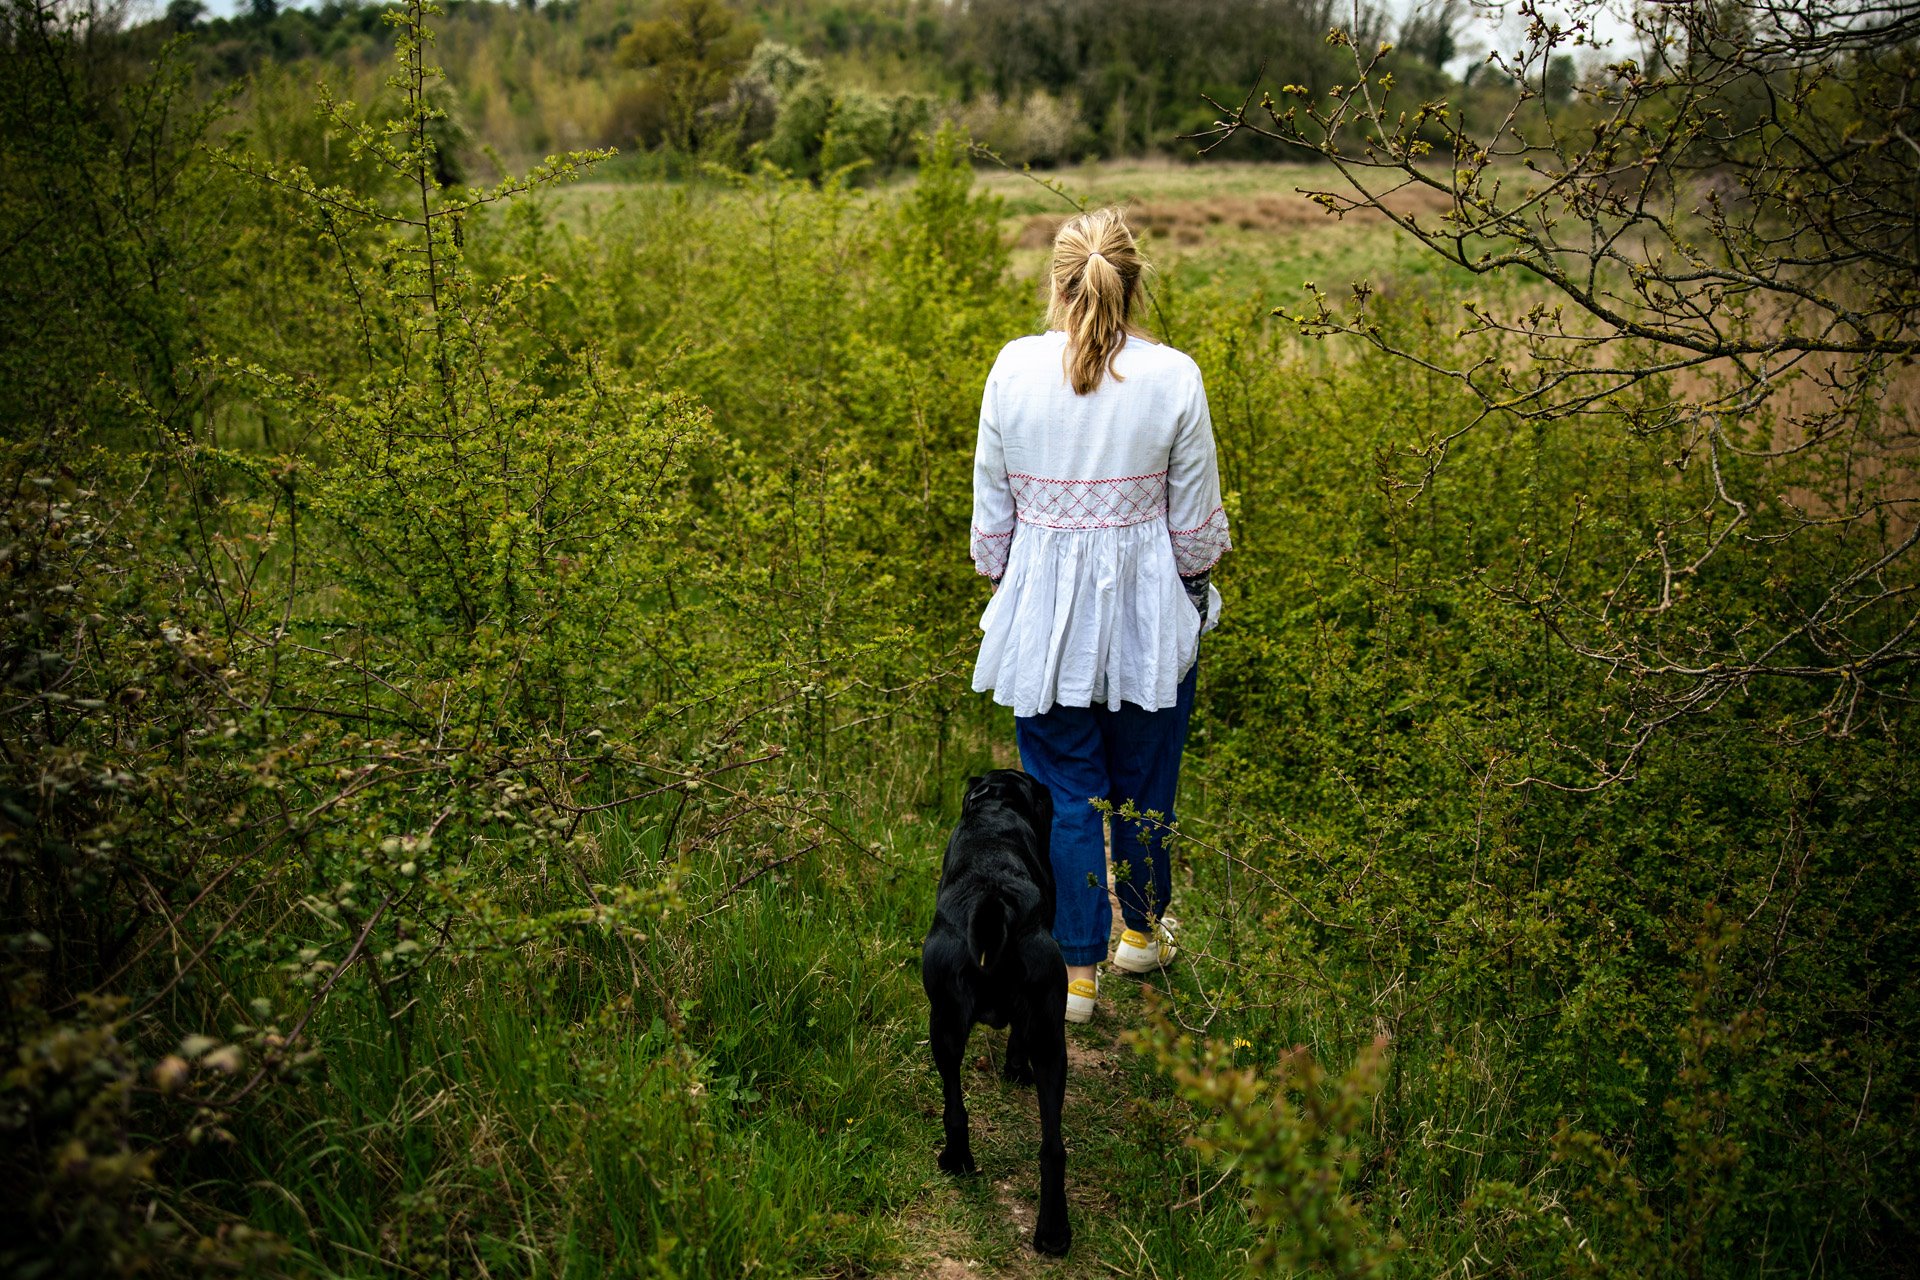 Rewilding project owner walking her dog through the ever changing wild wedding venue land